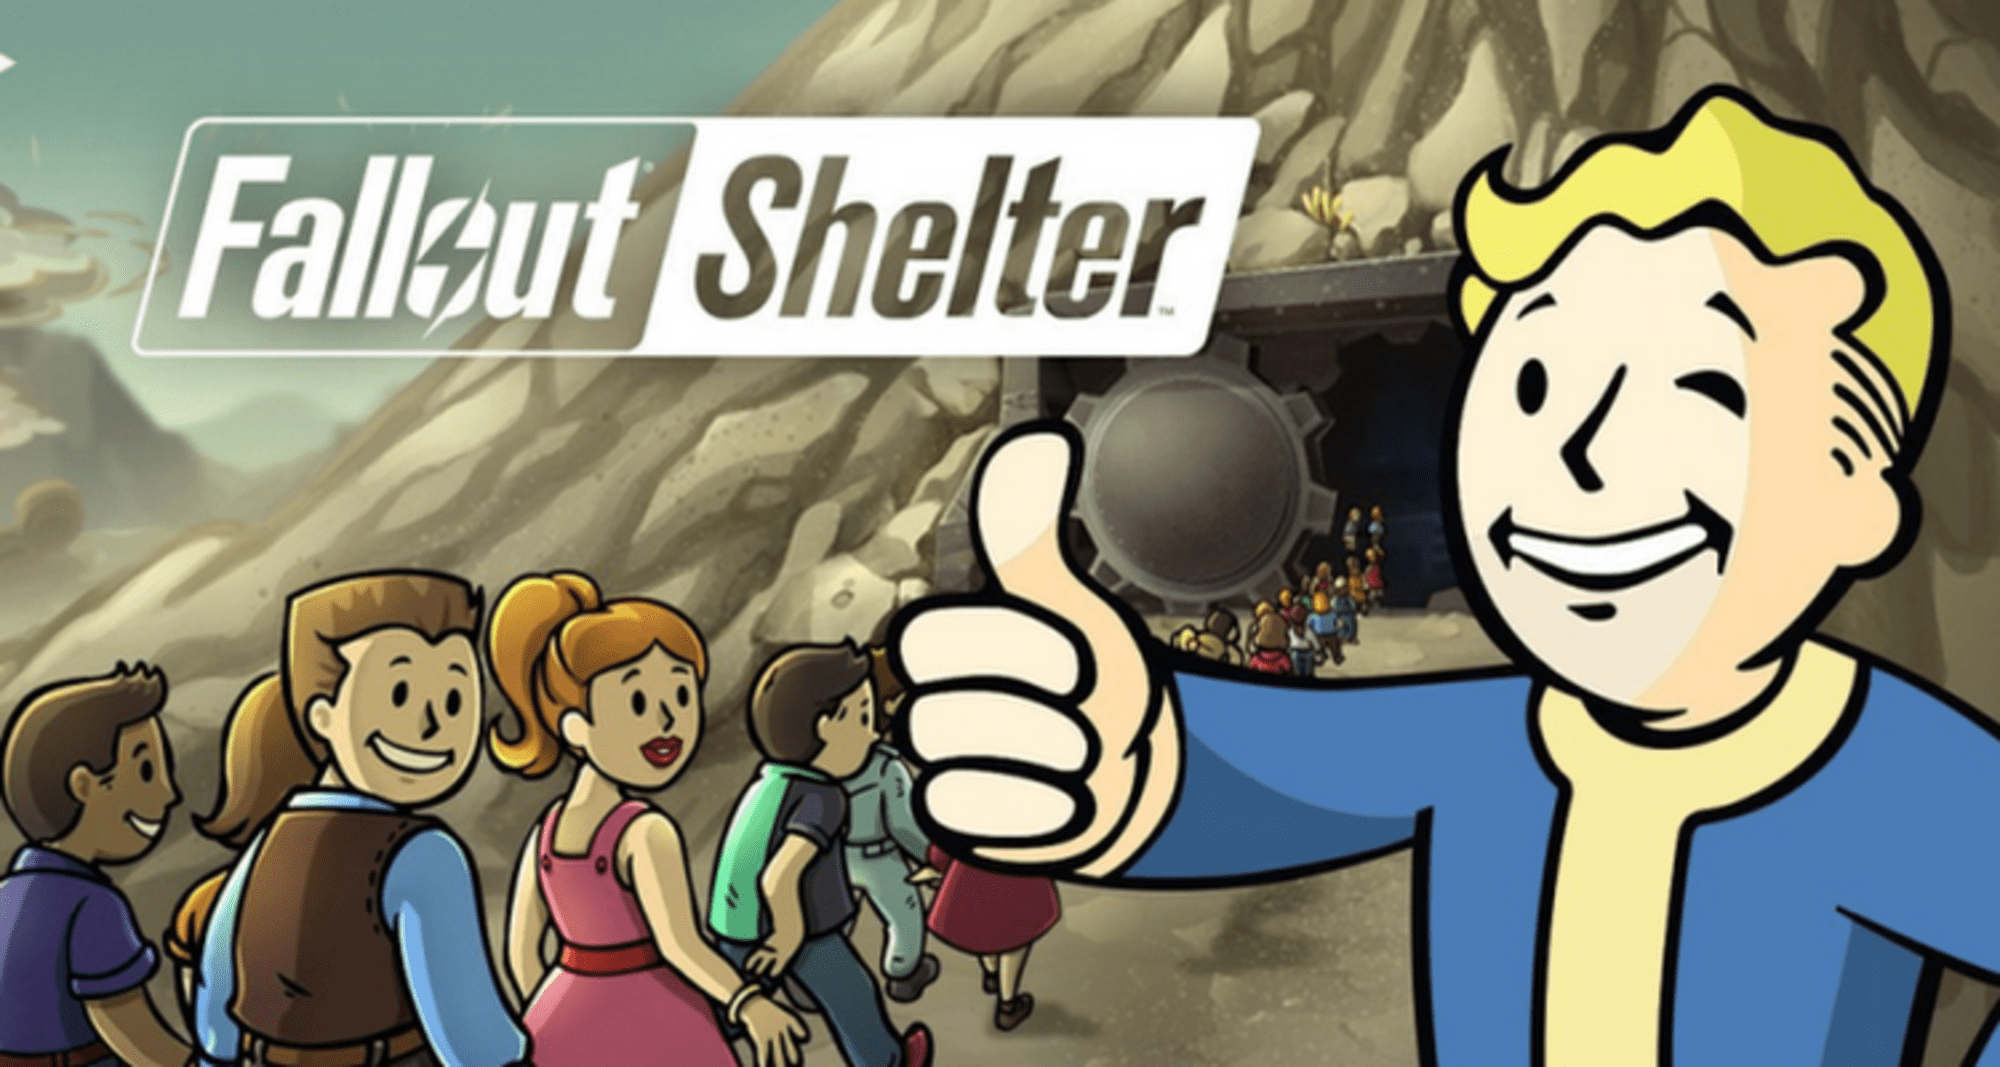 fallout shelter game tips and tricks